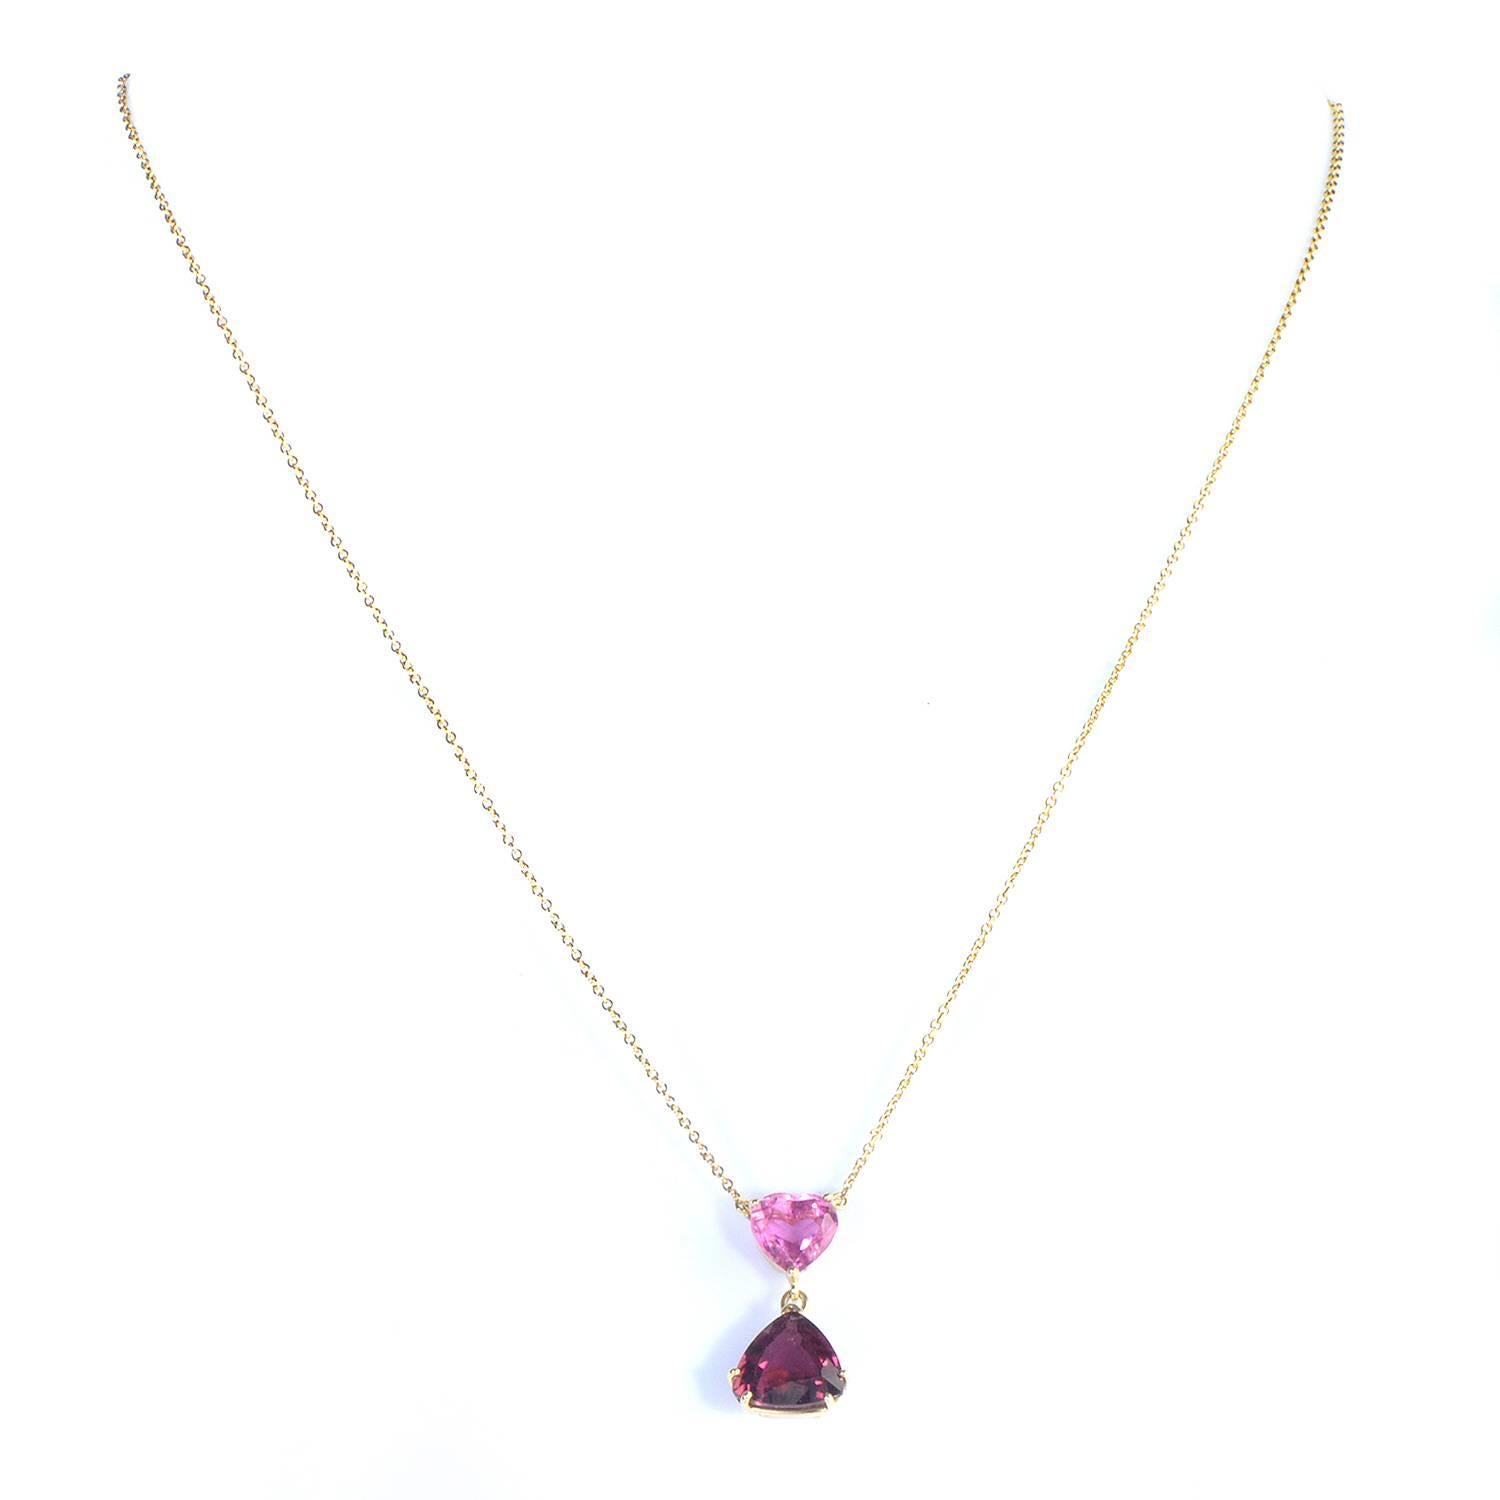 Charmingly romantic and delightfully tender, this wonderful necklace from Tiffany & Co. boasts a magnificent design by Paloma Picasso that combines 18K yellow gold with an enchanting heart-shaped tourmaline and captivating rhodolite stone.
Included